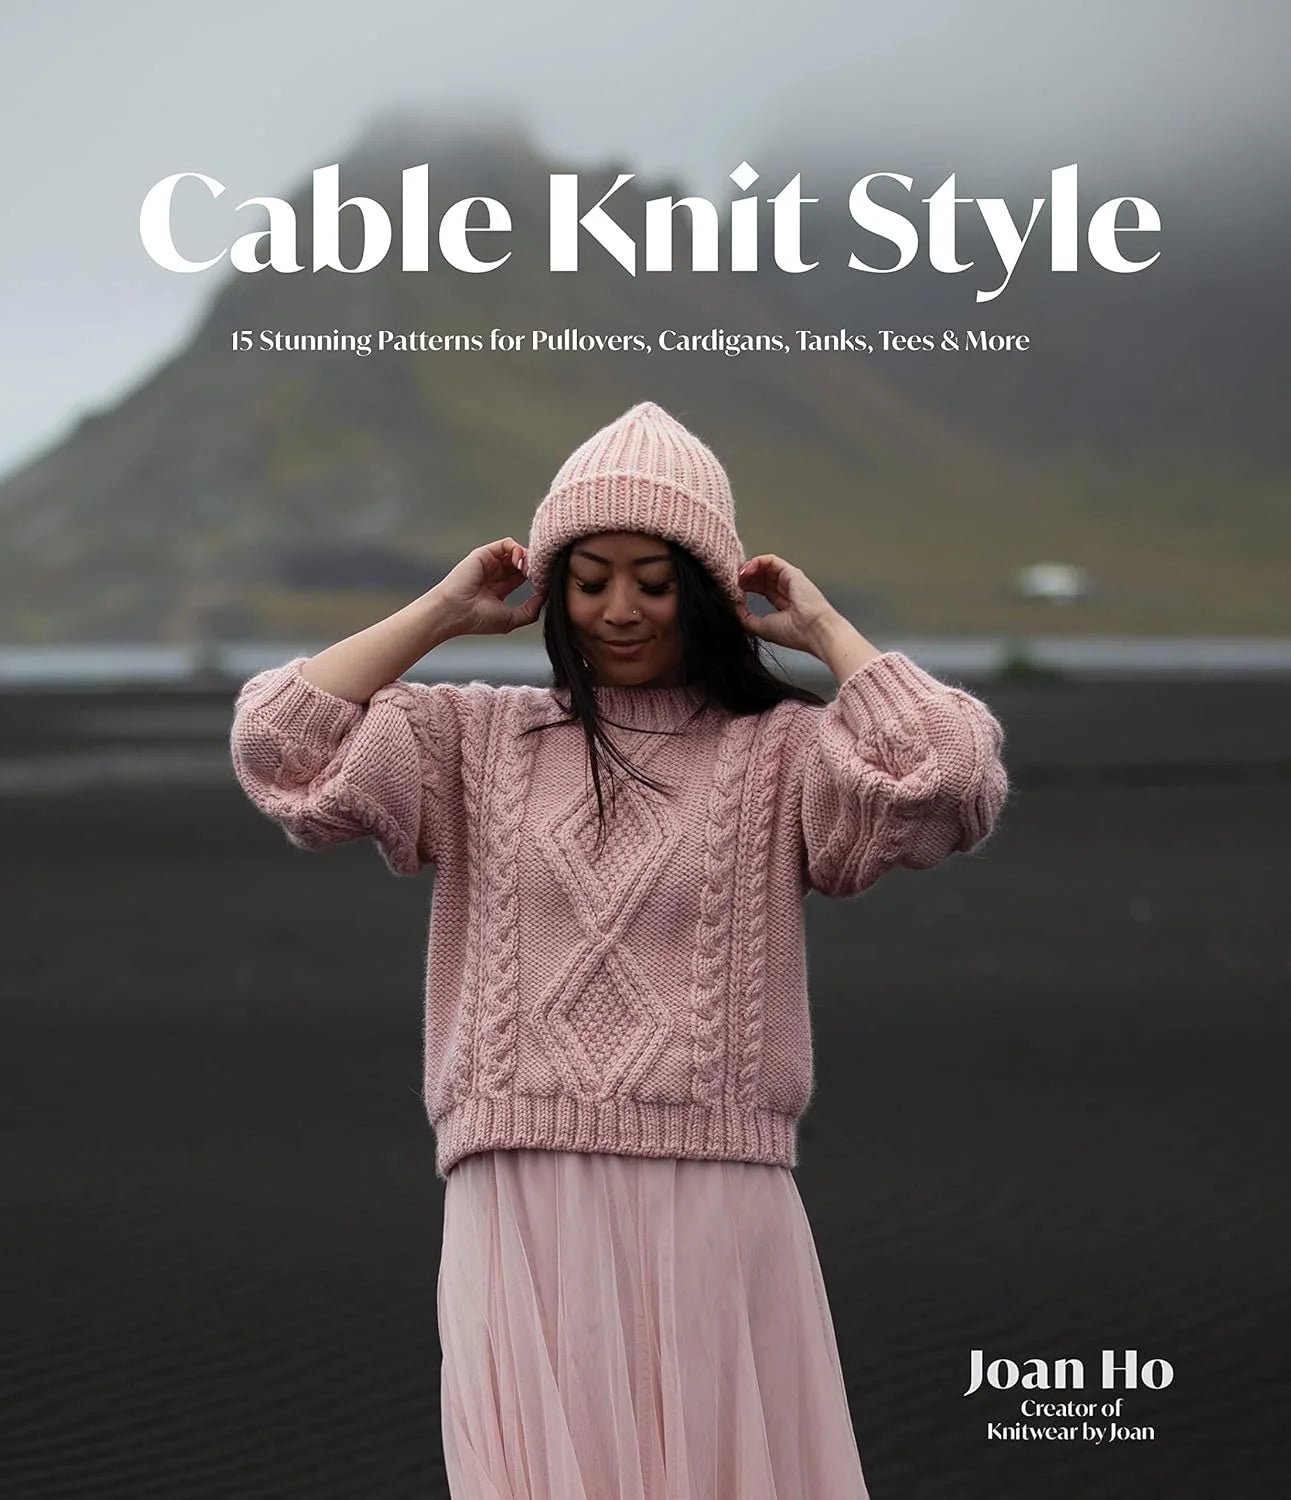 Cable Knit Style: 15 Stunning Patterns for Pullovers, Cardigans, Tanks, Tees & More - Joan Ho - The Little Yarn Store